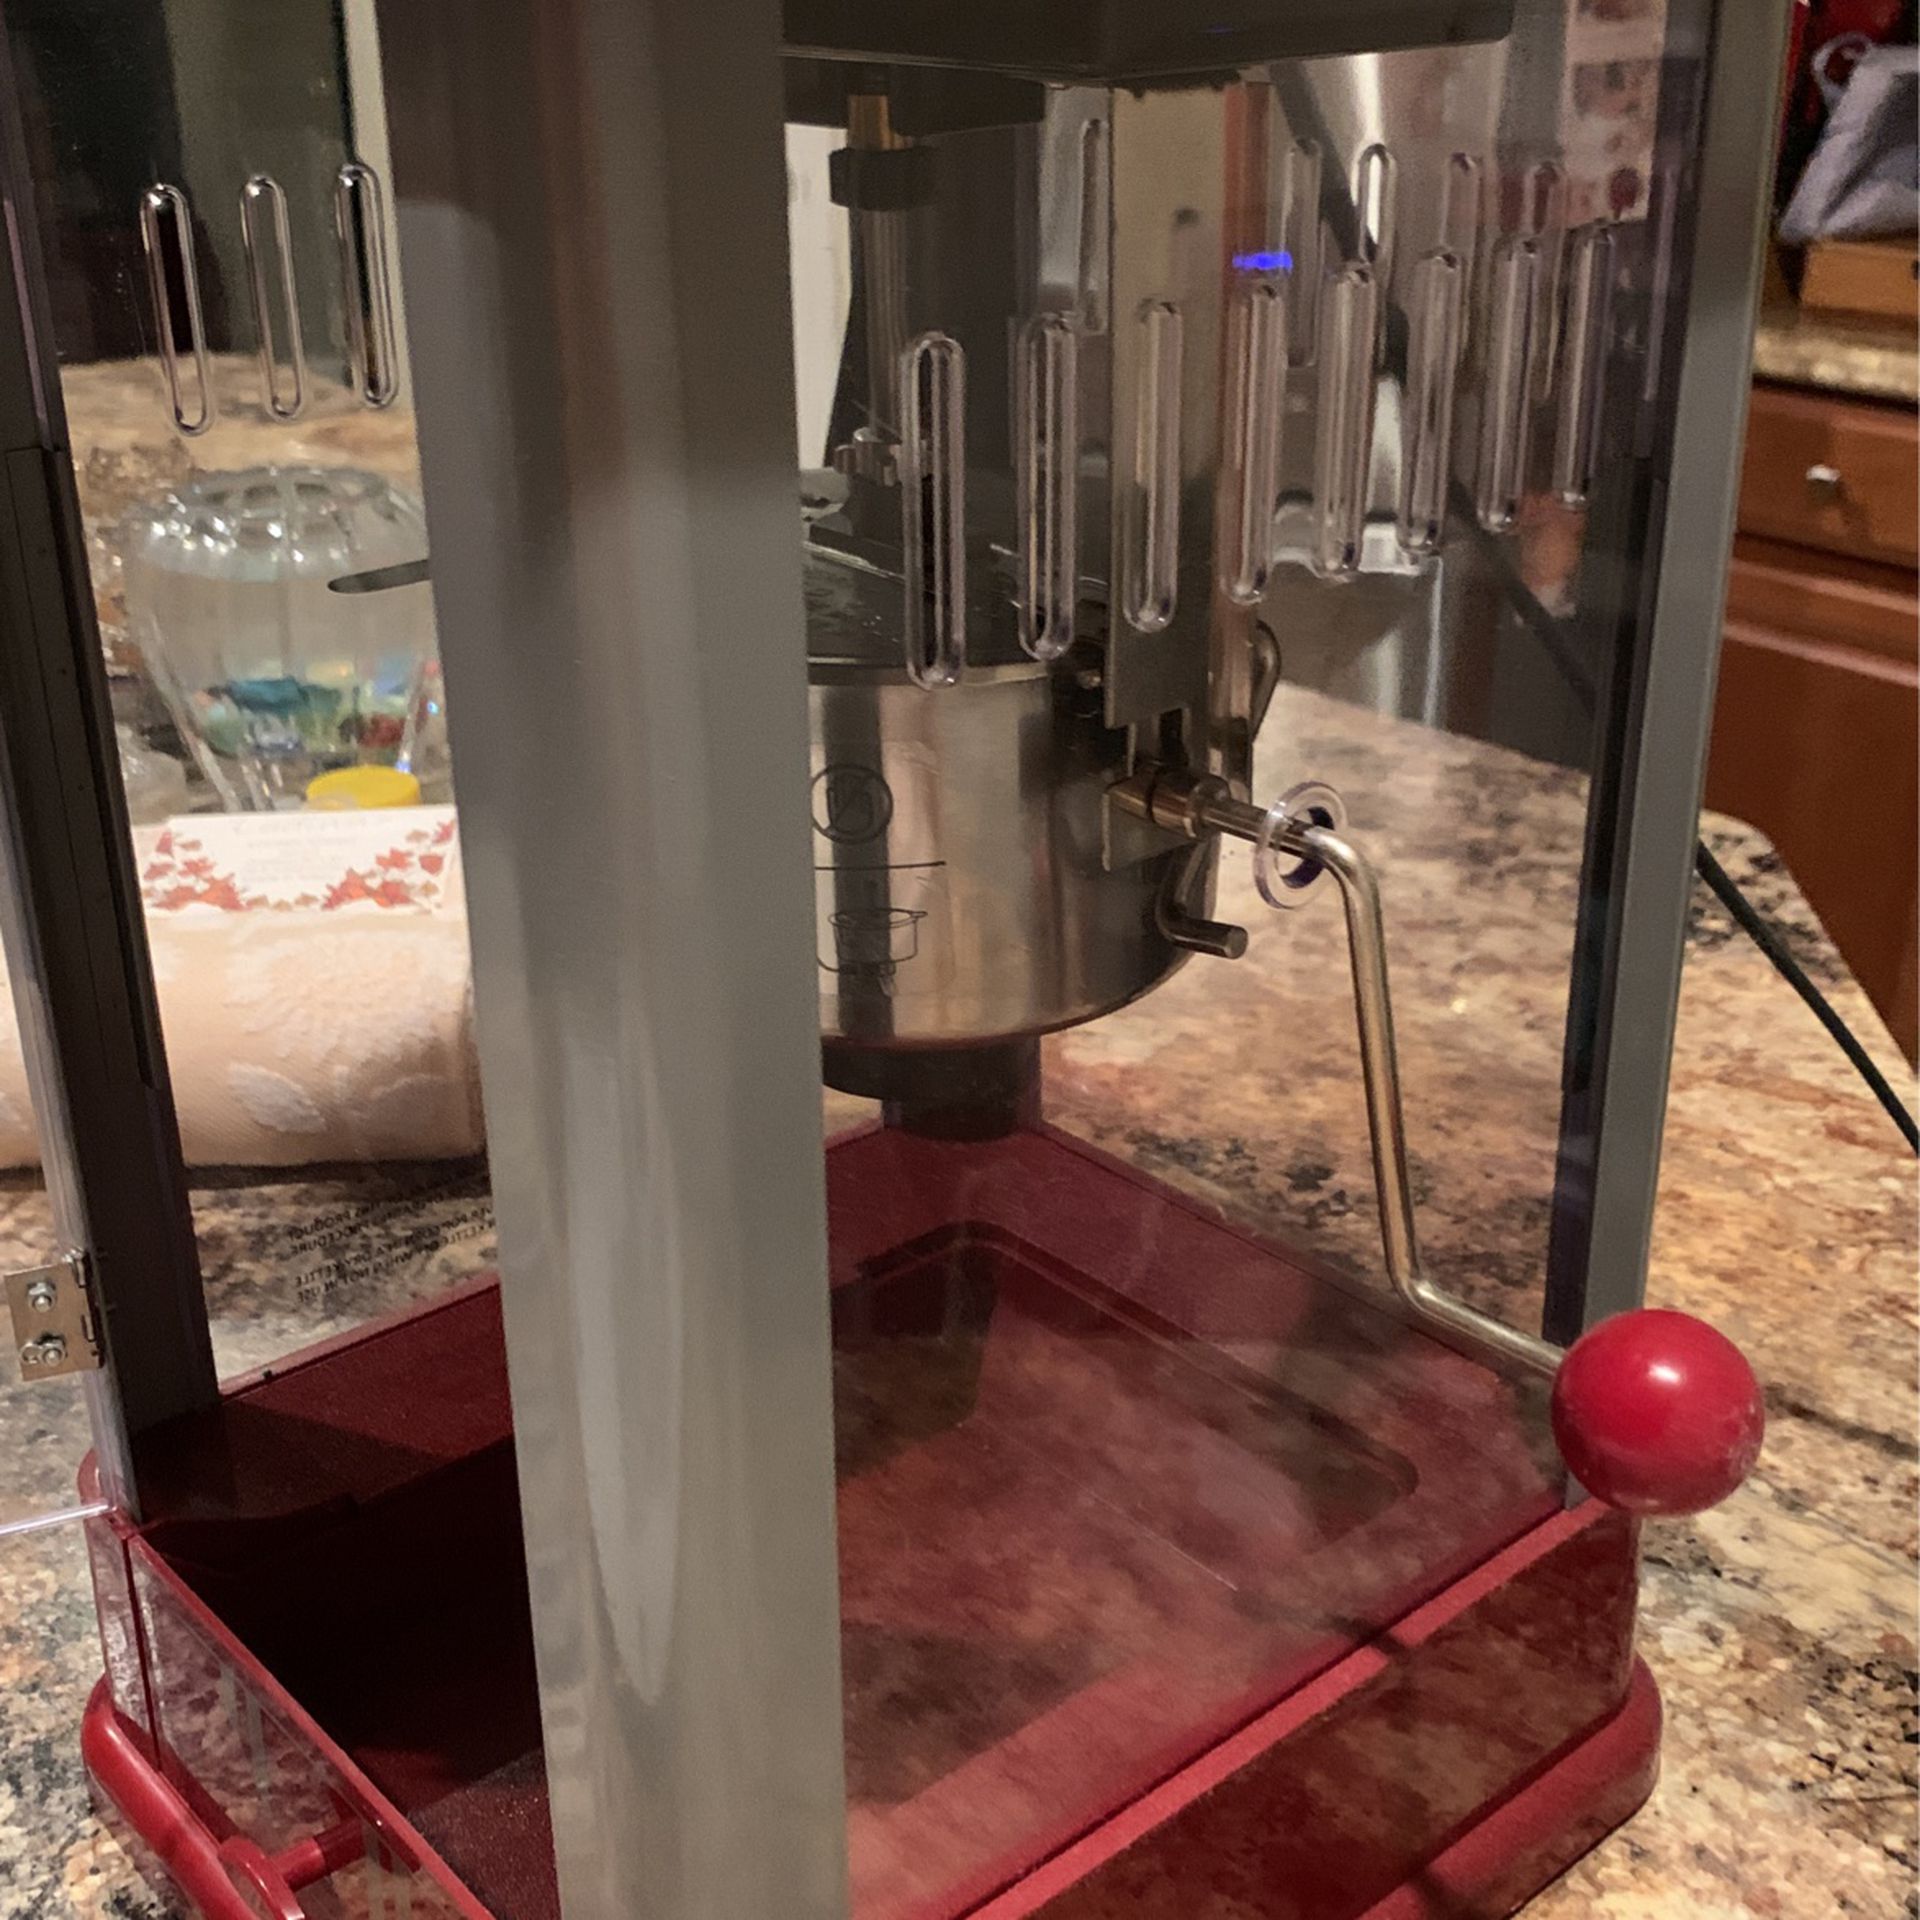 Cocoa Cola Popcorn Machine for Sale in Tobyhanna, PA - OfferUp